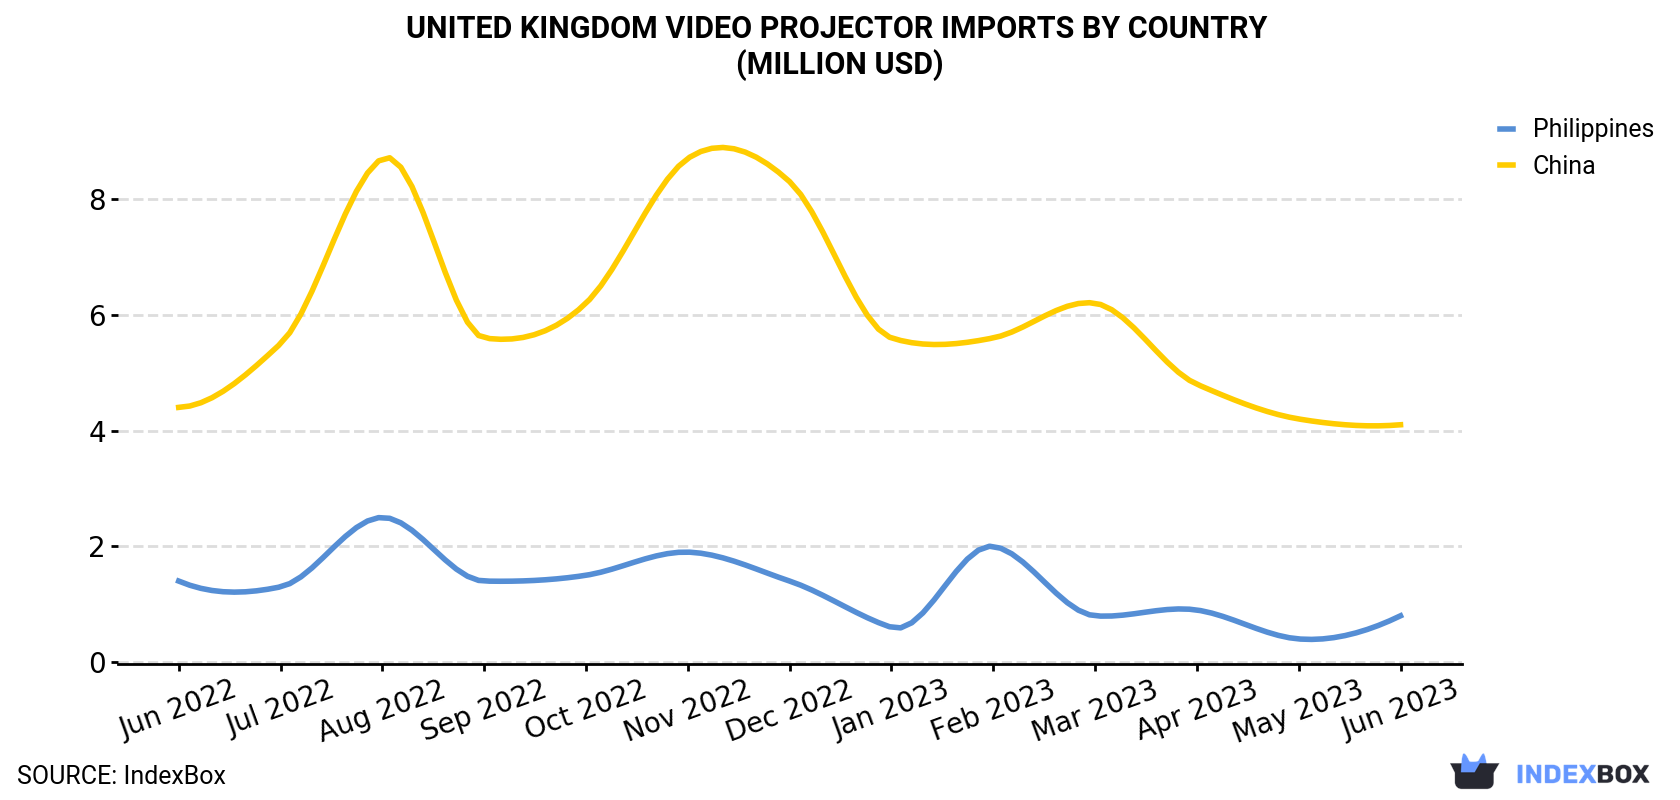 United Kingdom Video Projector Imports By Country (Million USD)